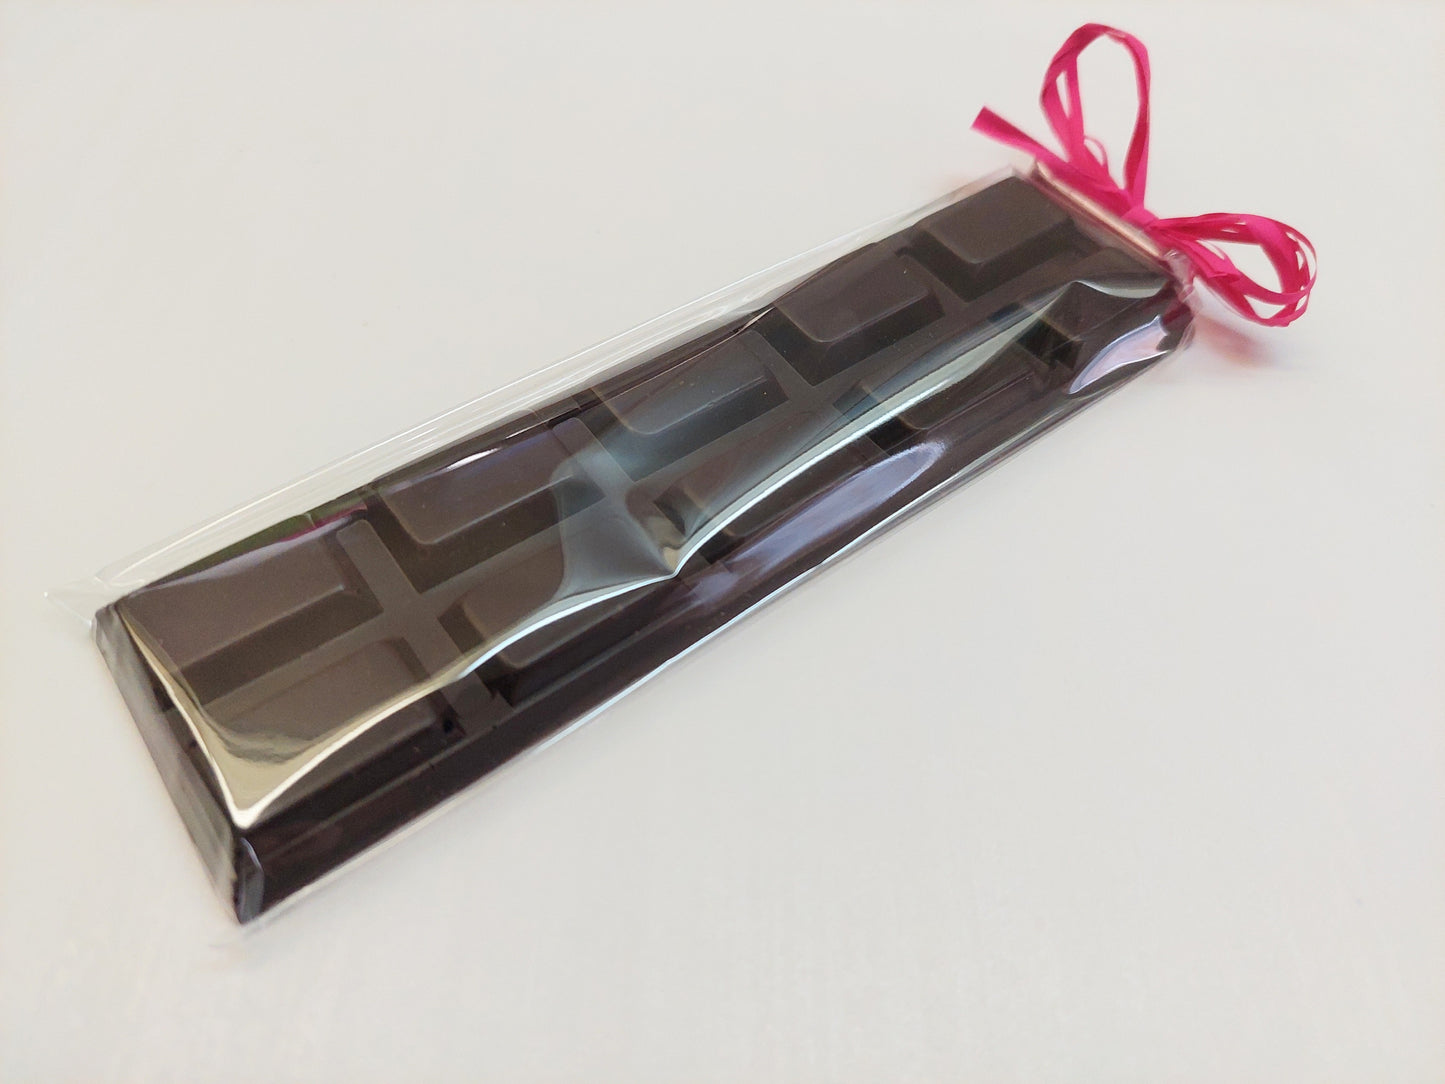 Solid Chocolate Bar (small)